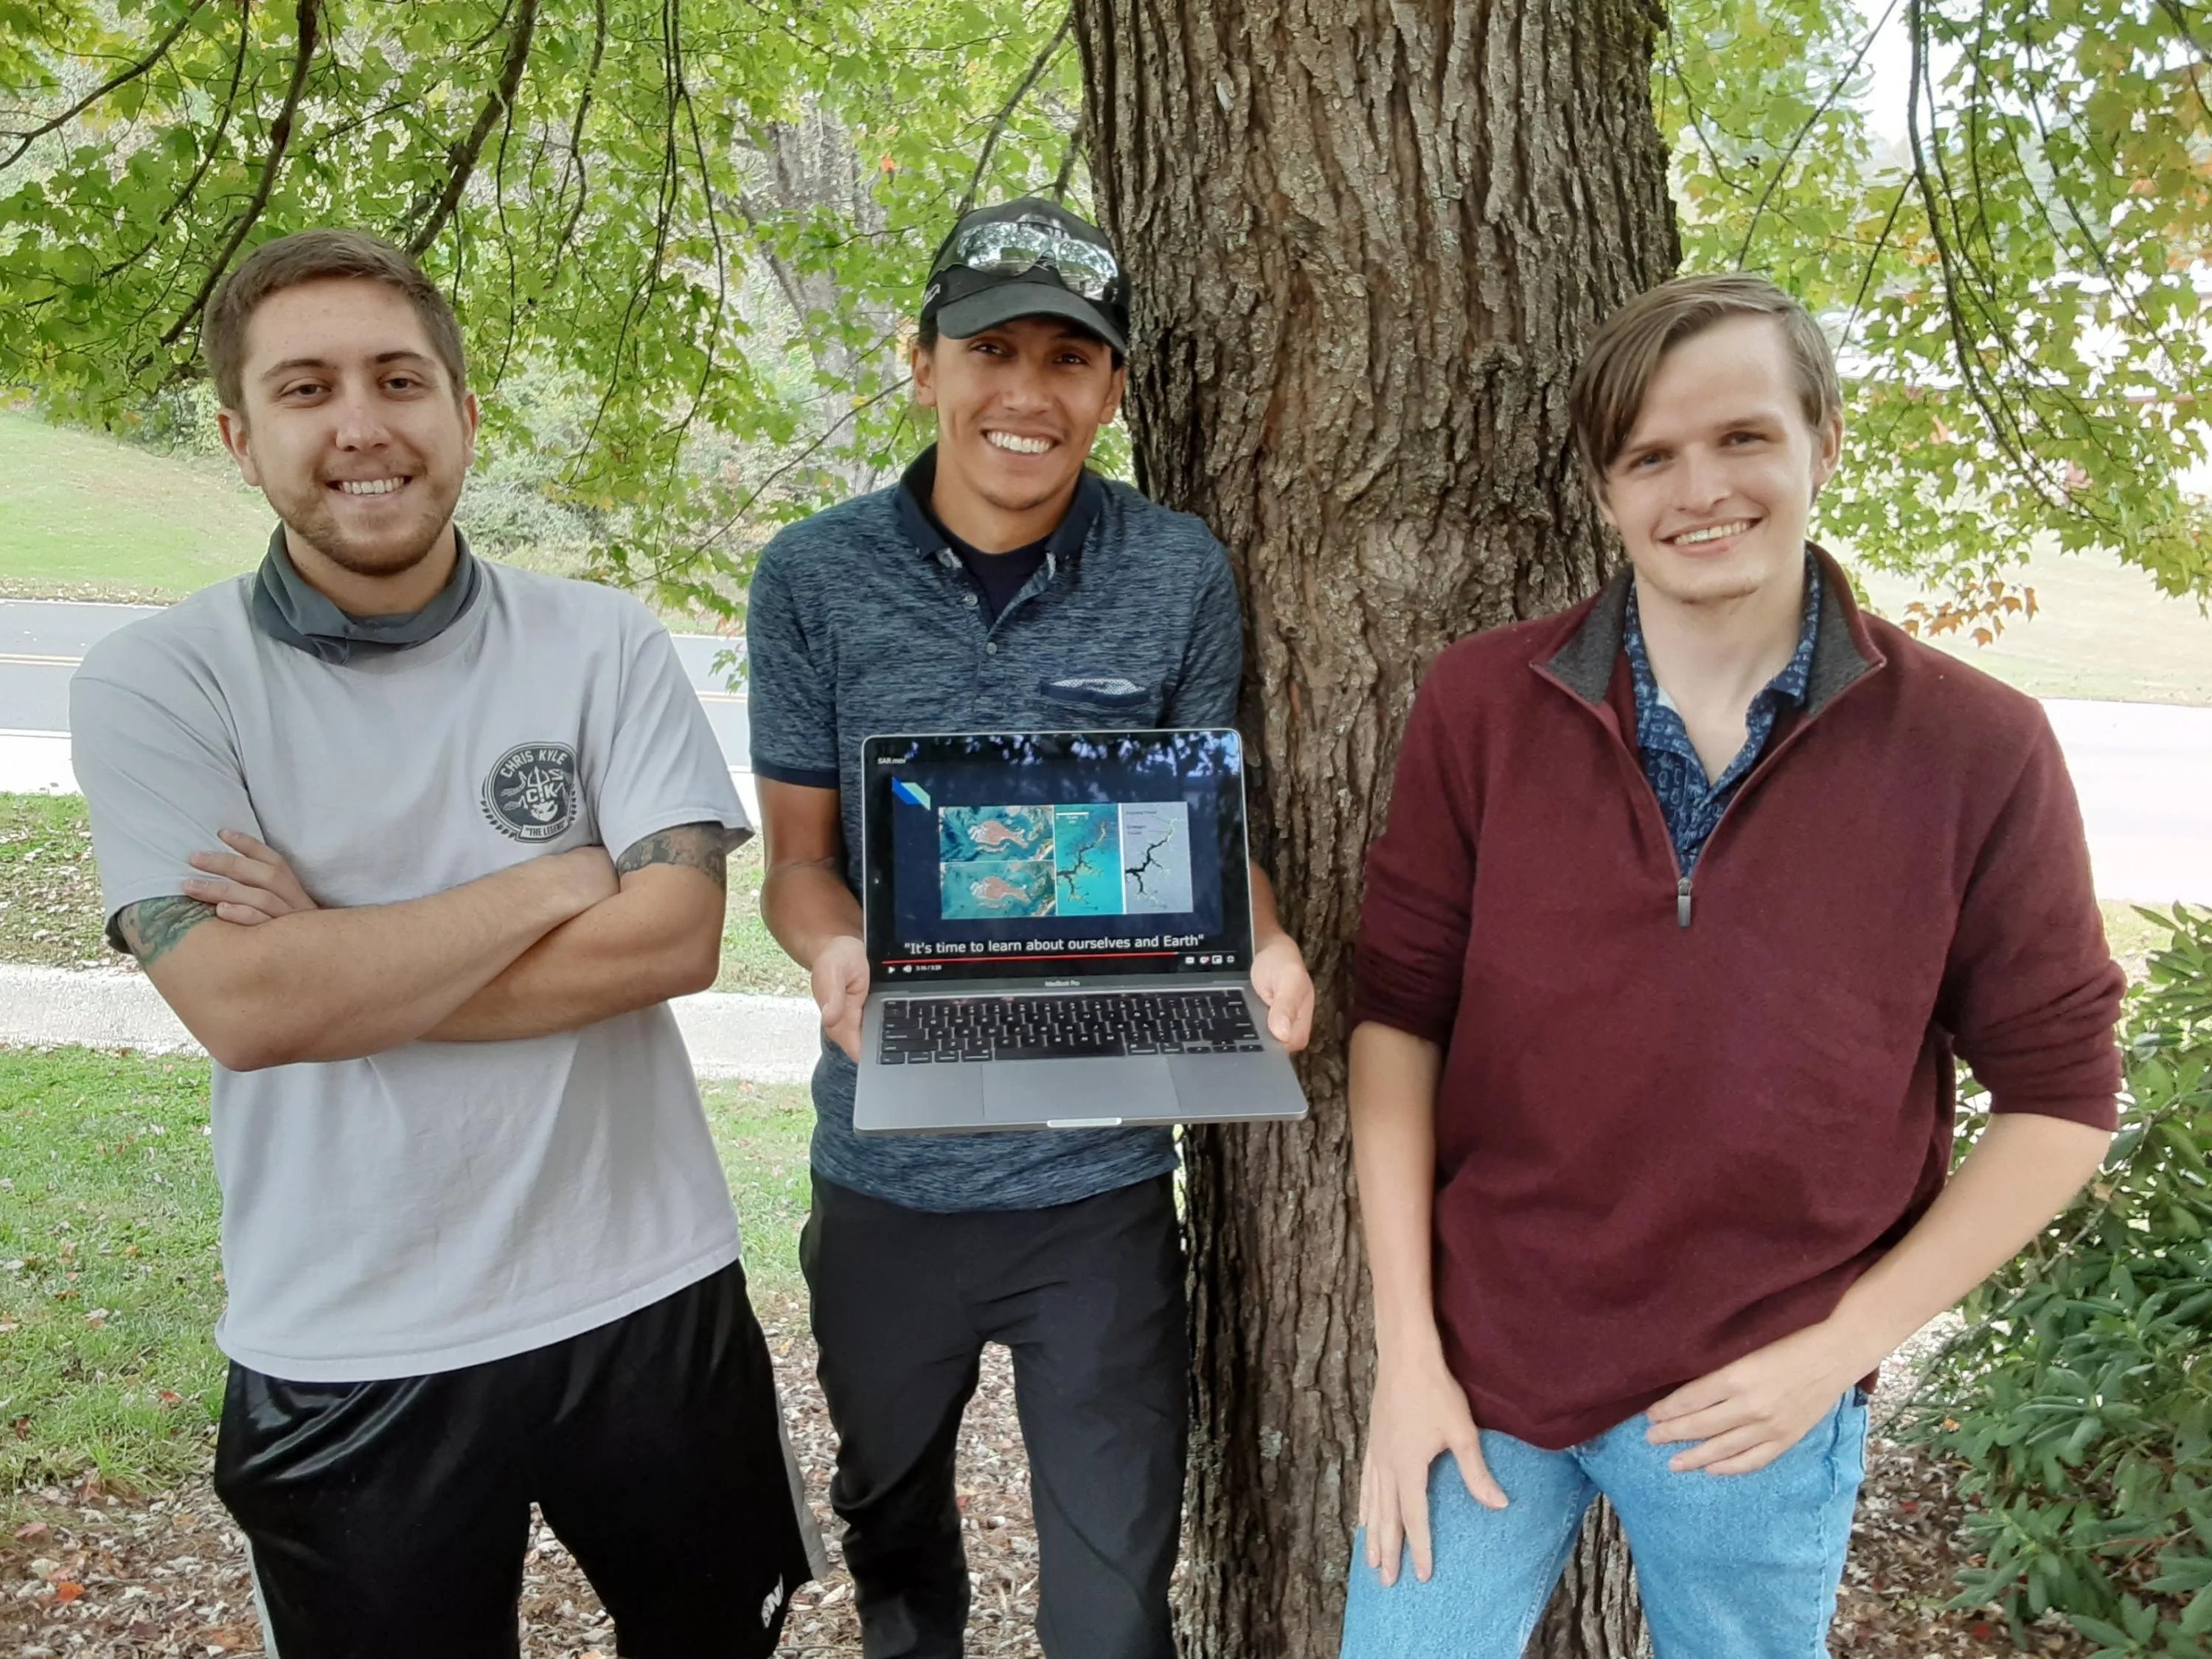 The three global nominees for the Rosman location for the 2021 Space Apps Challenge.  Andrew Frady, Alberto Cruz, and Daniel Triplett pose with their project outside of Southwestern Community College.